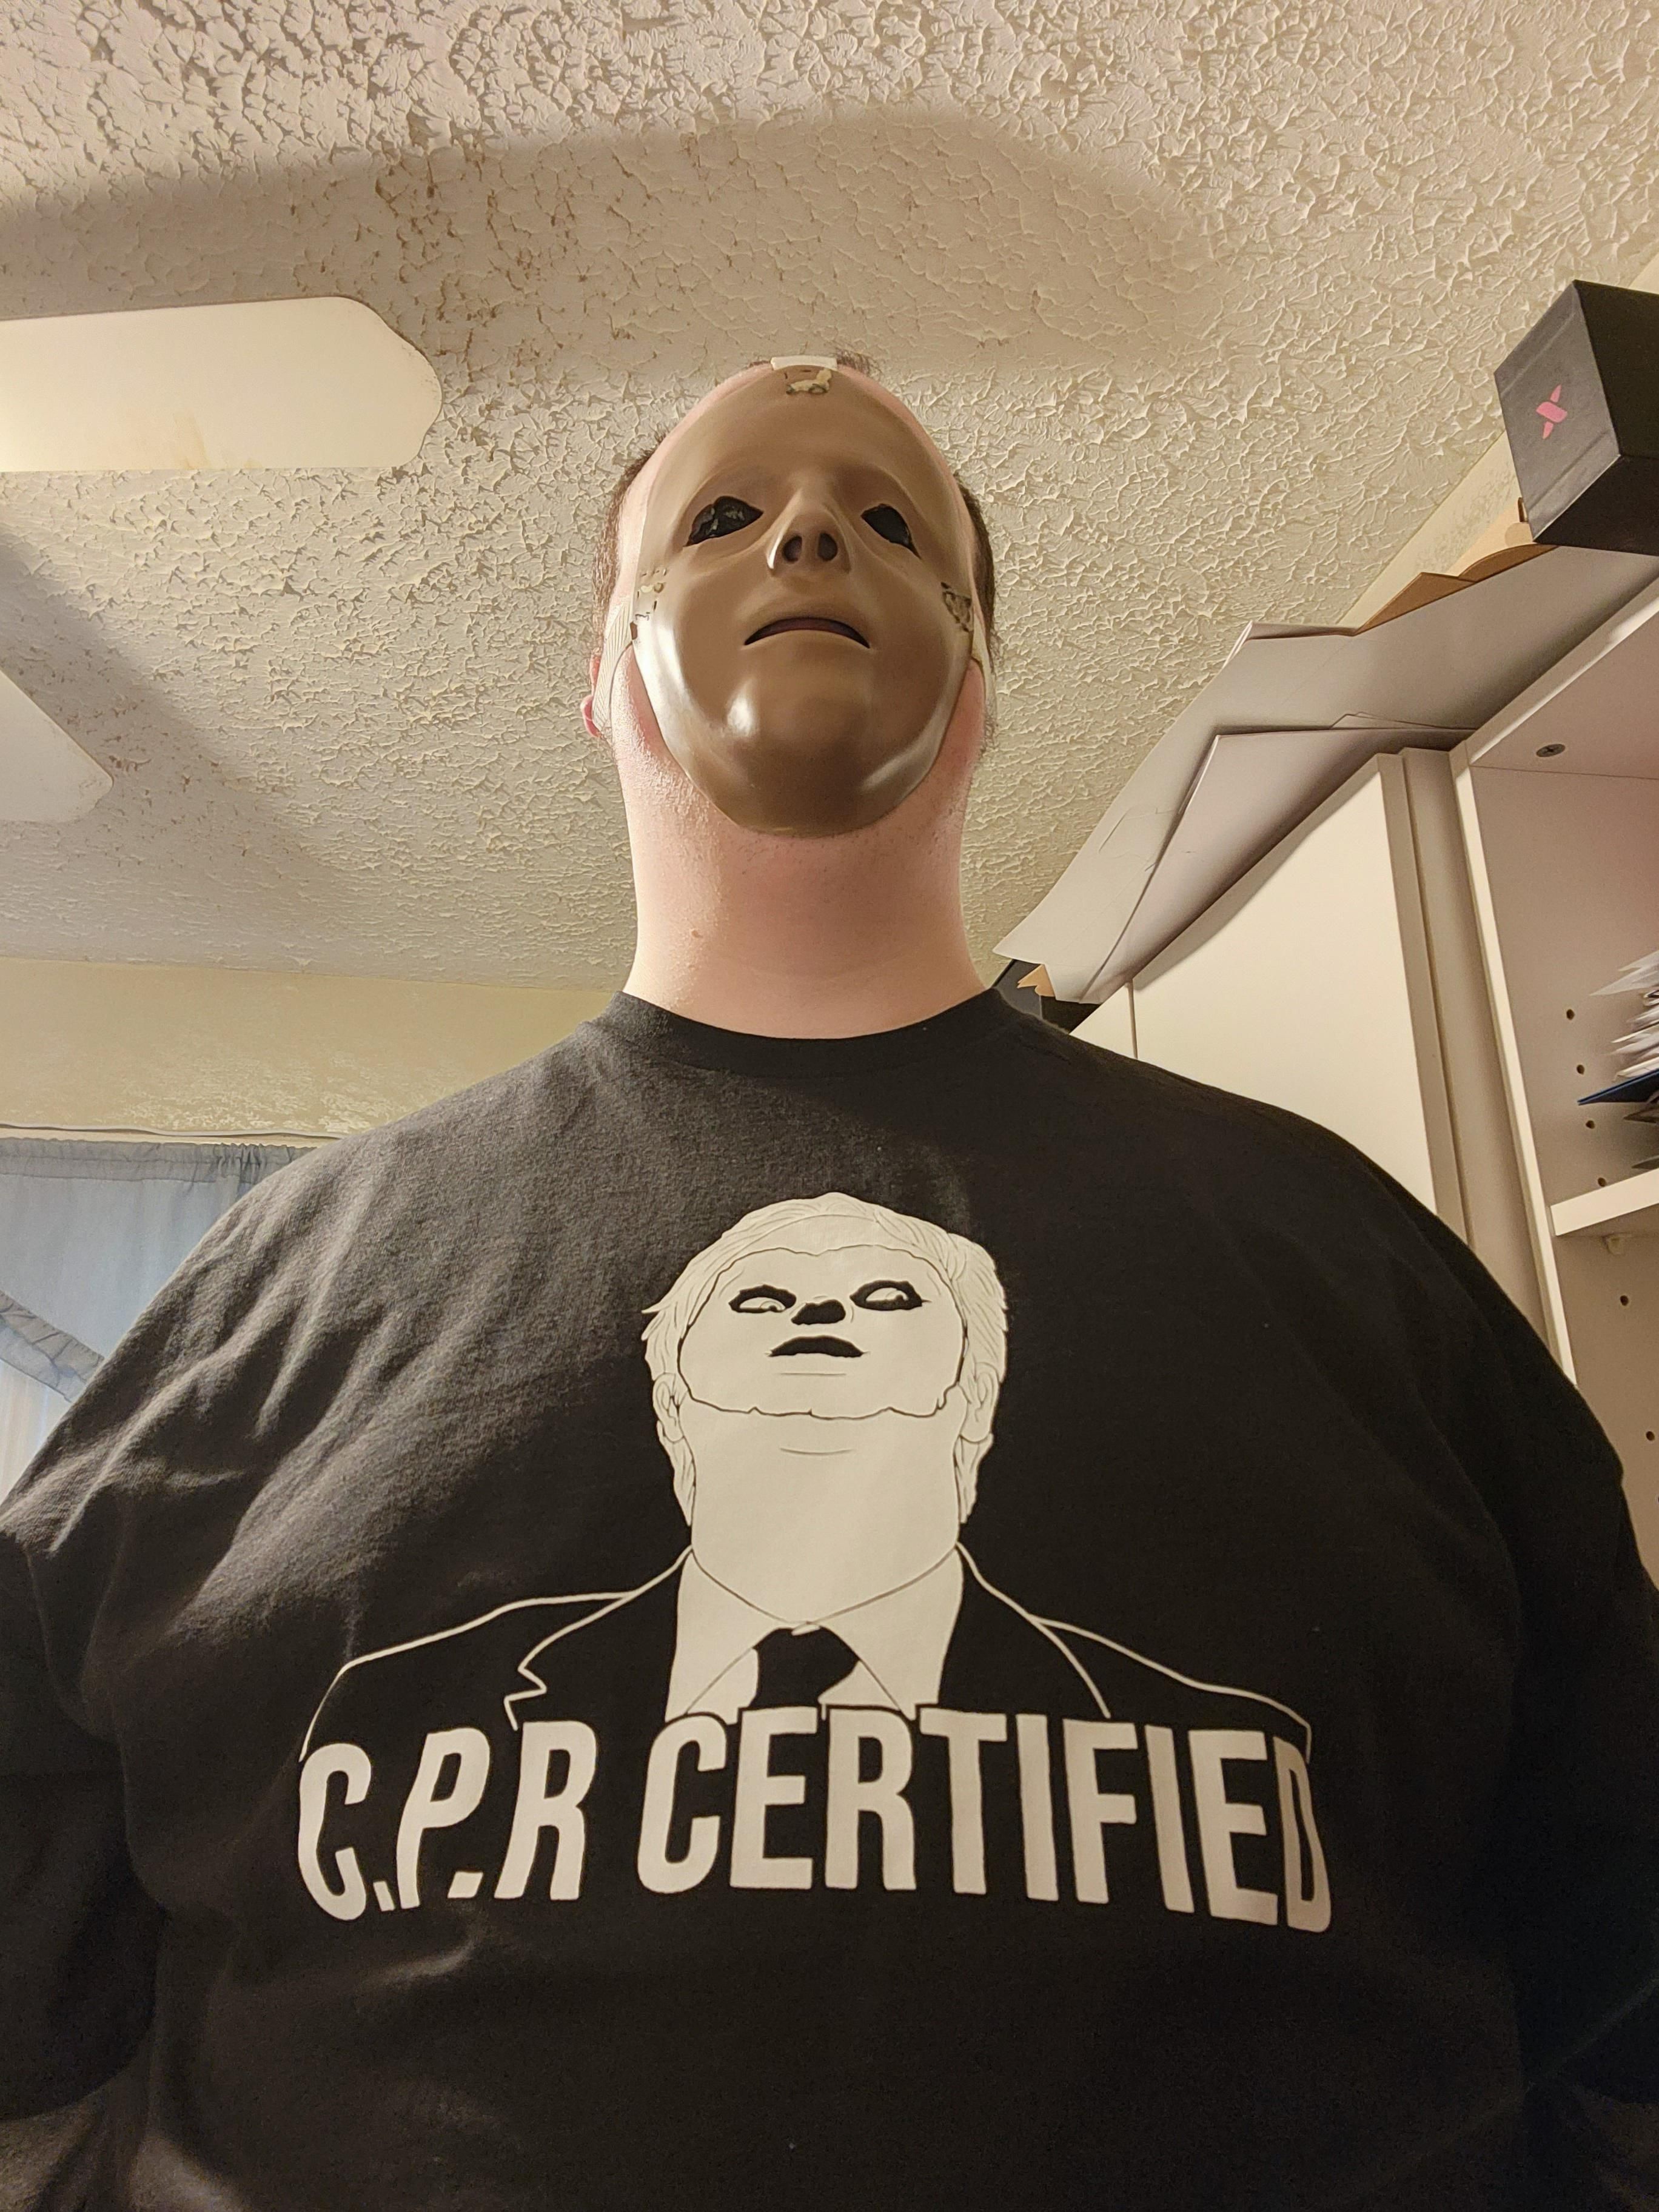 After cutting the face off a CPR doll, my coworkers got me this shirt.